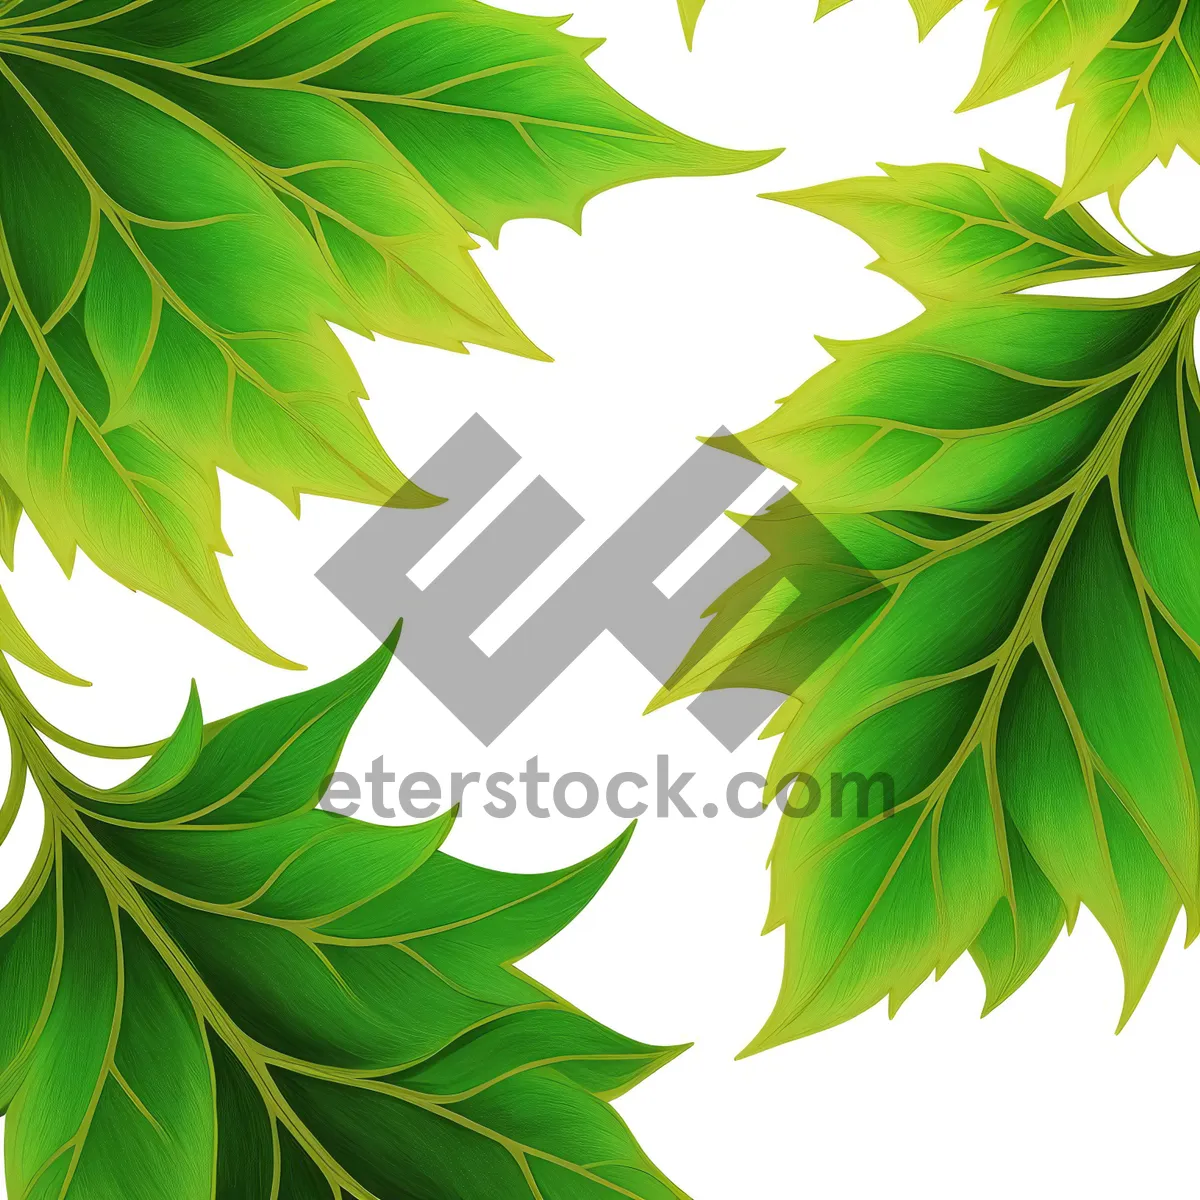 Picture of Colorful Summer Foliage with Oak and Maple Leaves